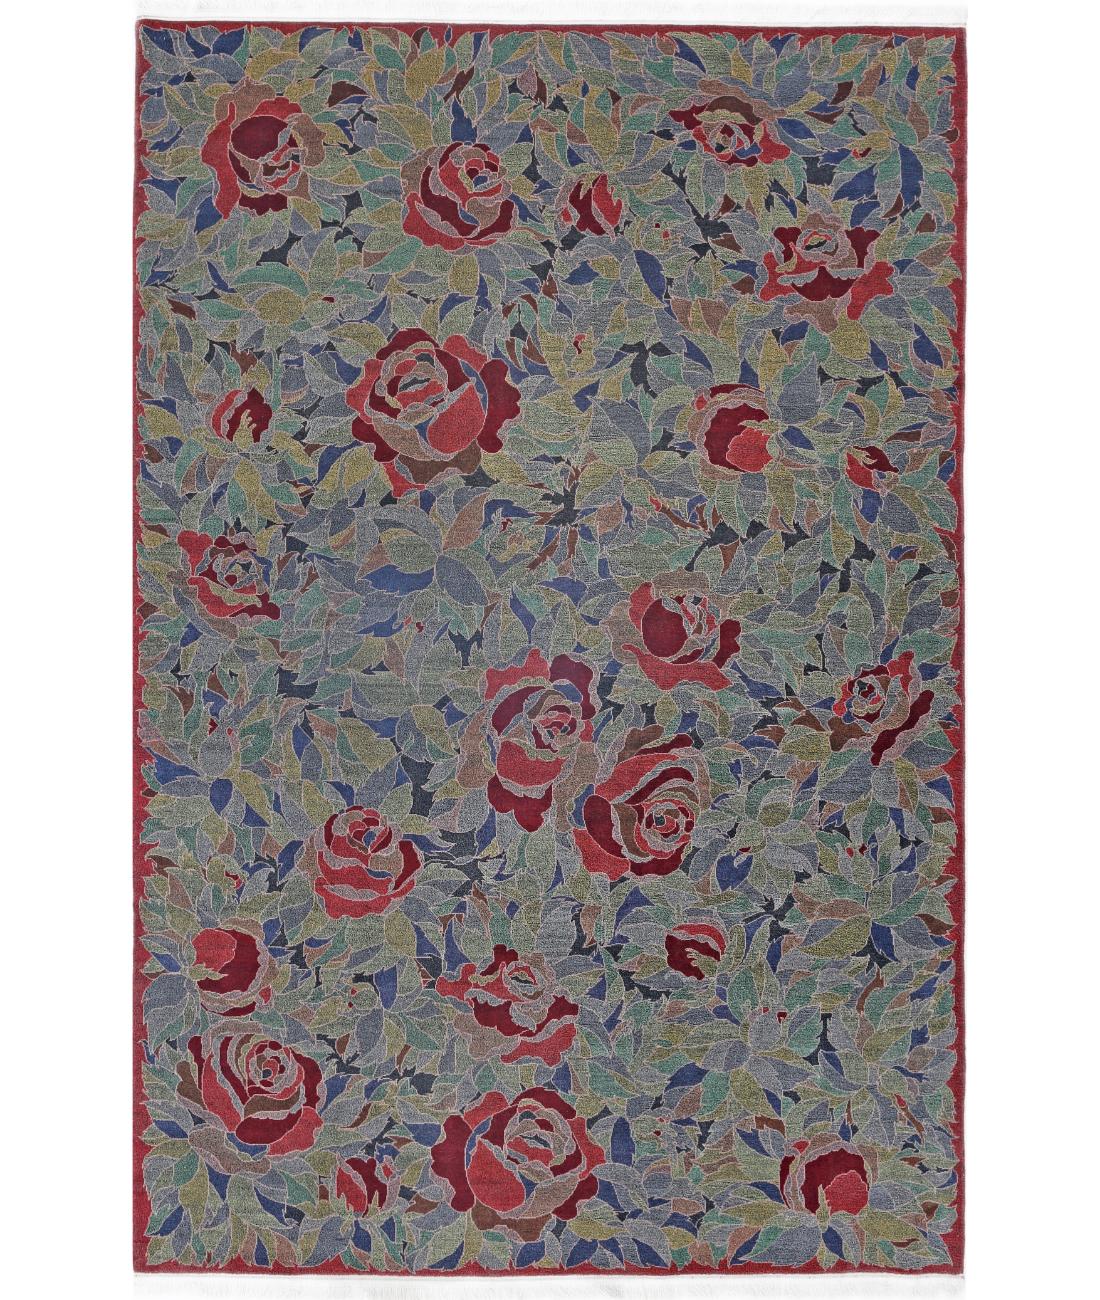 Hand Knotted Floral Wool Rug - 6'0'' x 9'0'' 6' 0" X 9' 0" (183 X 274) / Blue / Green